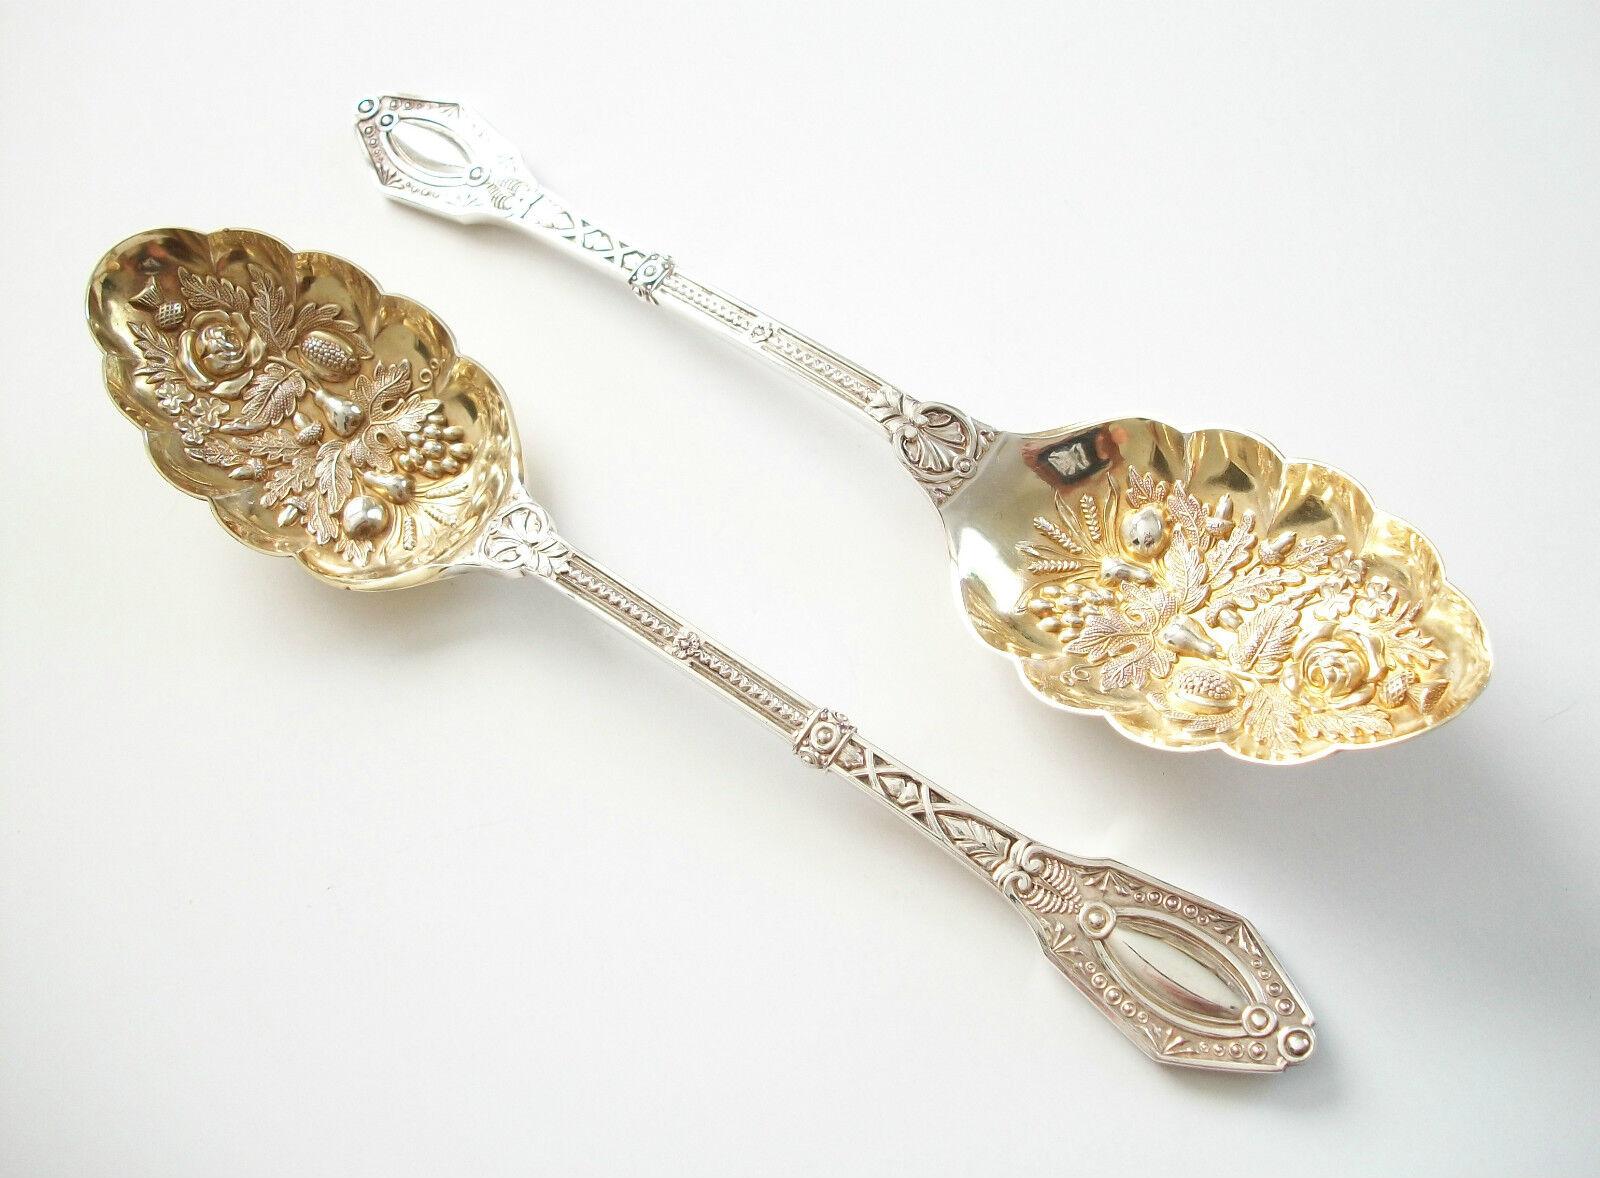 Antique - Victorian silver plate berry serving spoons - gold wash to each finely detailed and tooled bowl - contained in their original silk and velvet lined tooled leather bound case - unsigned - Victorian registration marks to each handle - U.K. -